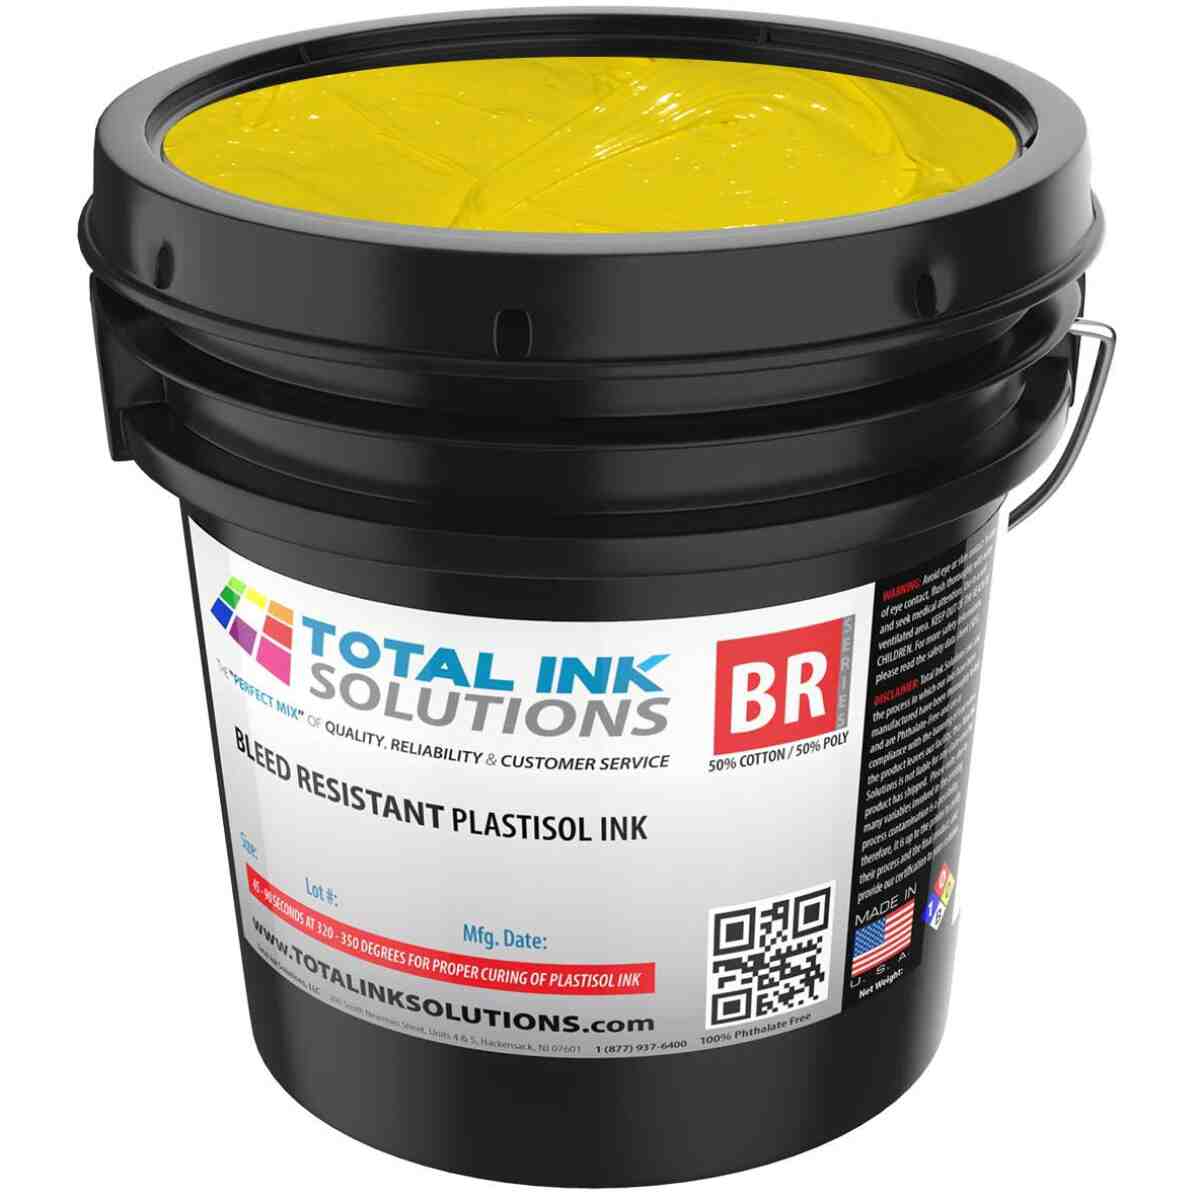 Bleed Resistant Plastisol Ink - Colors-5 Gallon TOTAL INK SOLUTIONS®